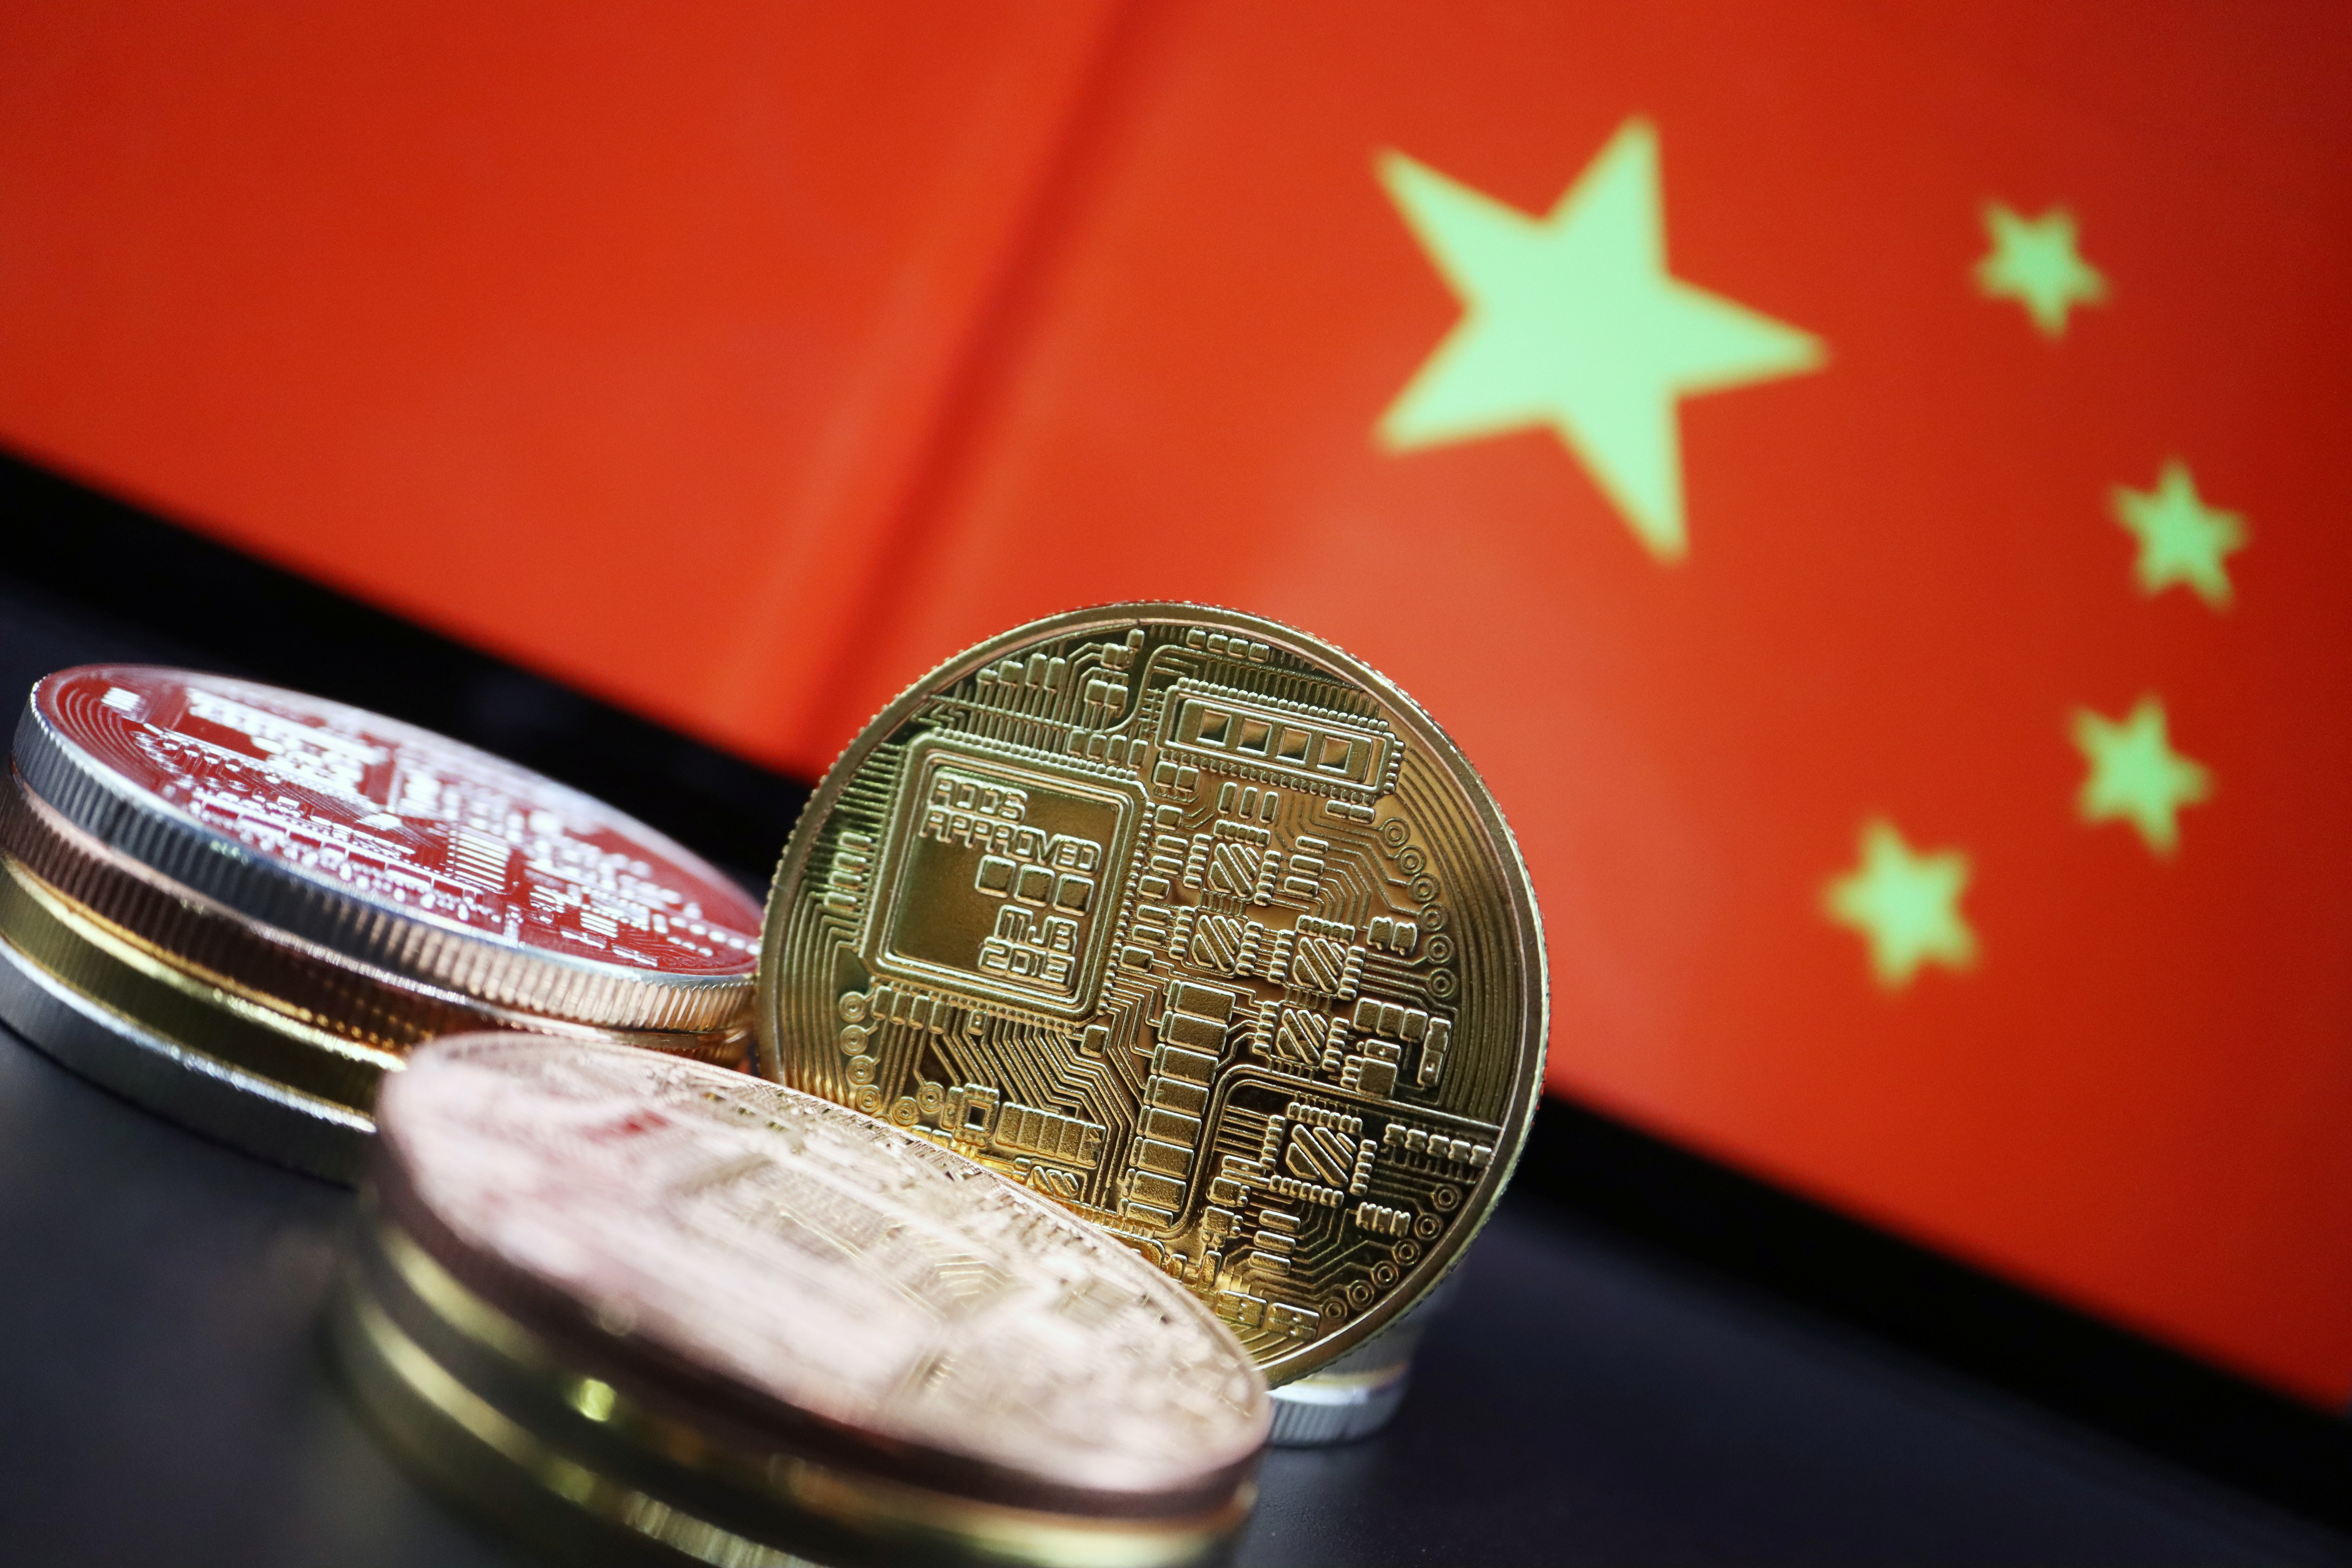 Cryptocurrency representations are seen in front of an image of the Chinese flag in this illustration picture taken June 2, 2021. REUTERS/Florence Lo/Illustration